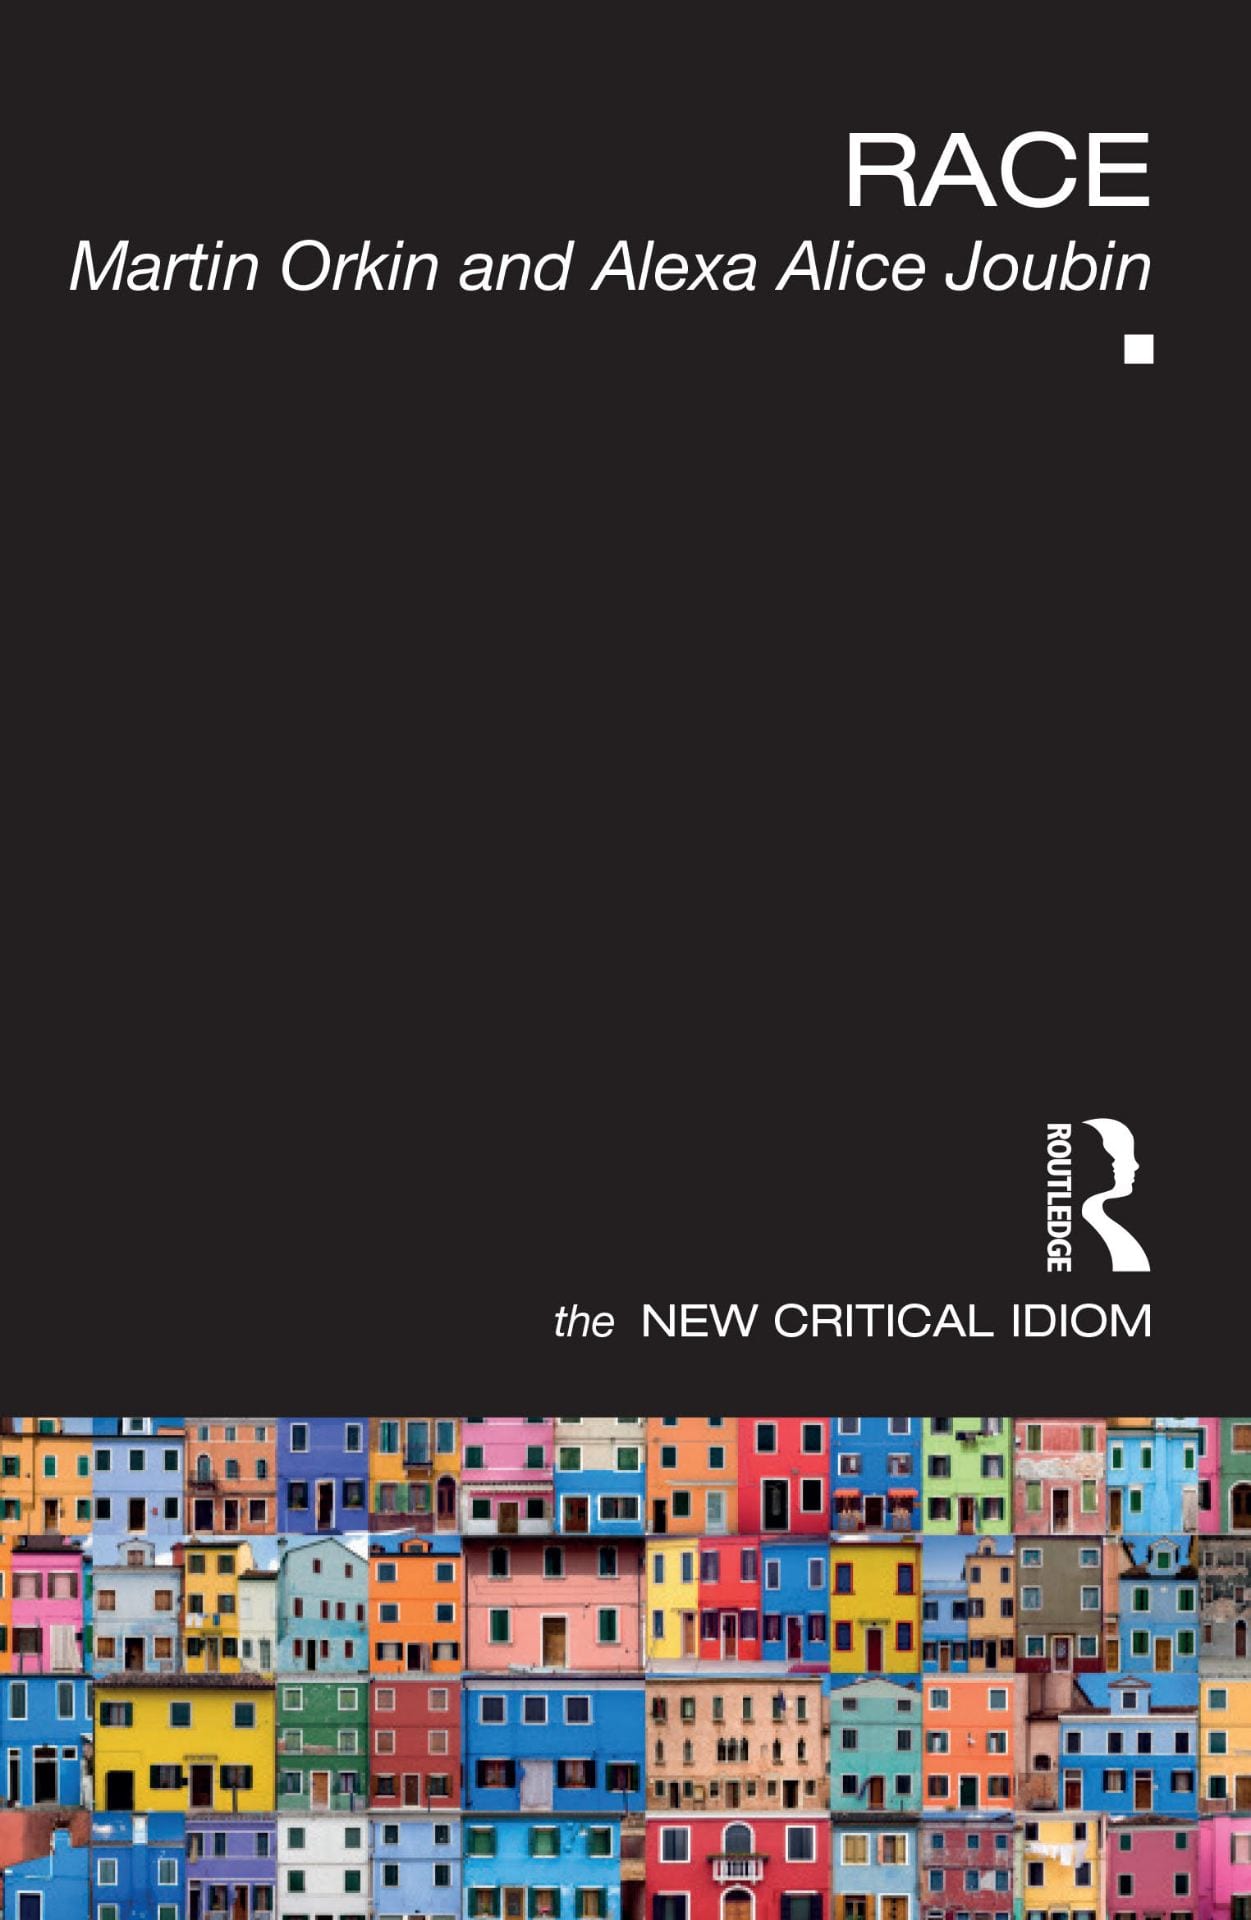 New Book: Race (Routledge New Critical Idiom Series)